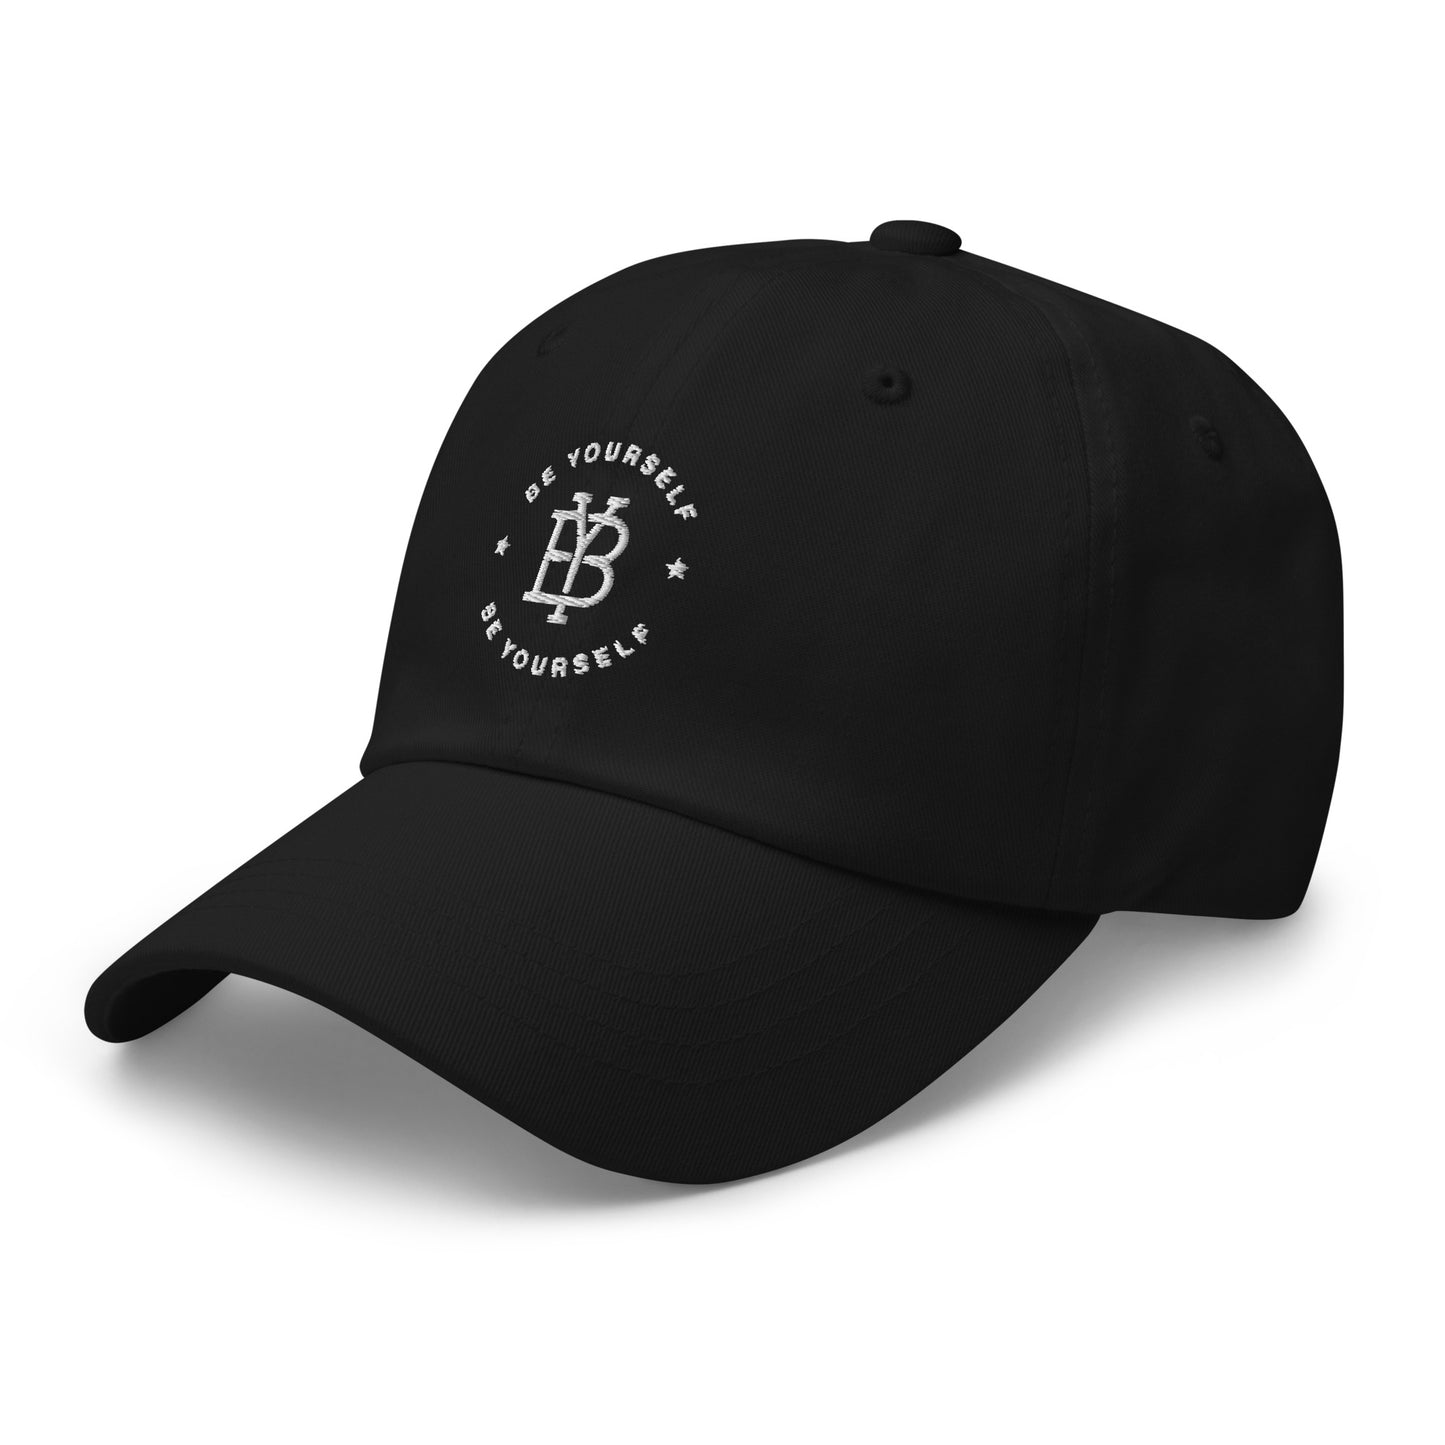 Be yourself Dad hat